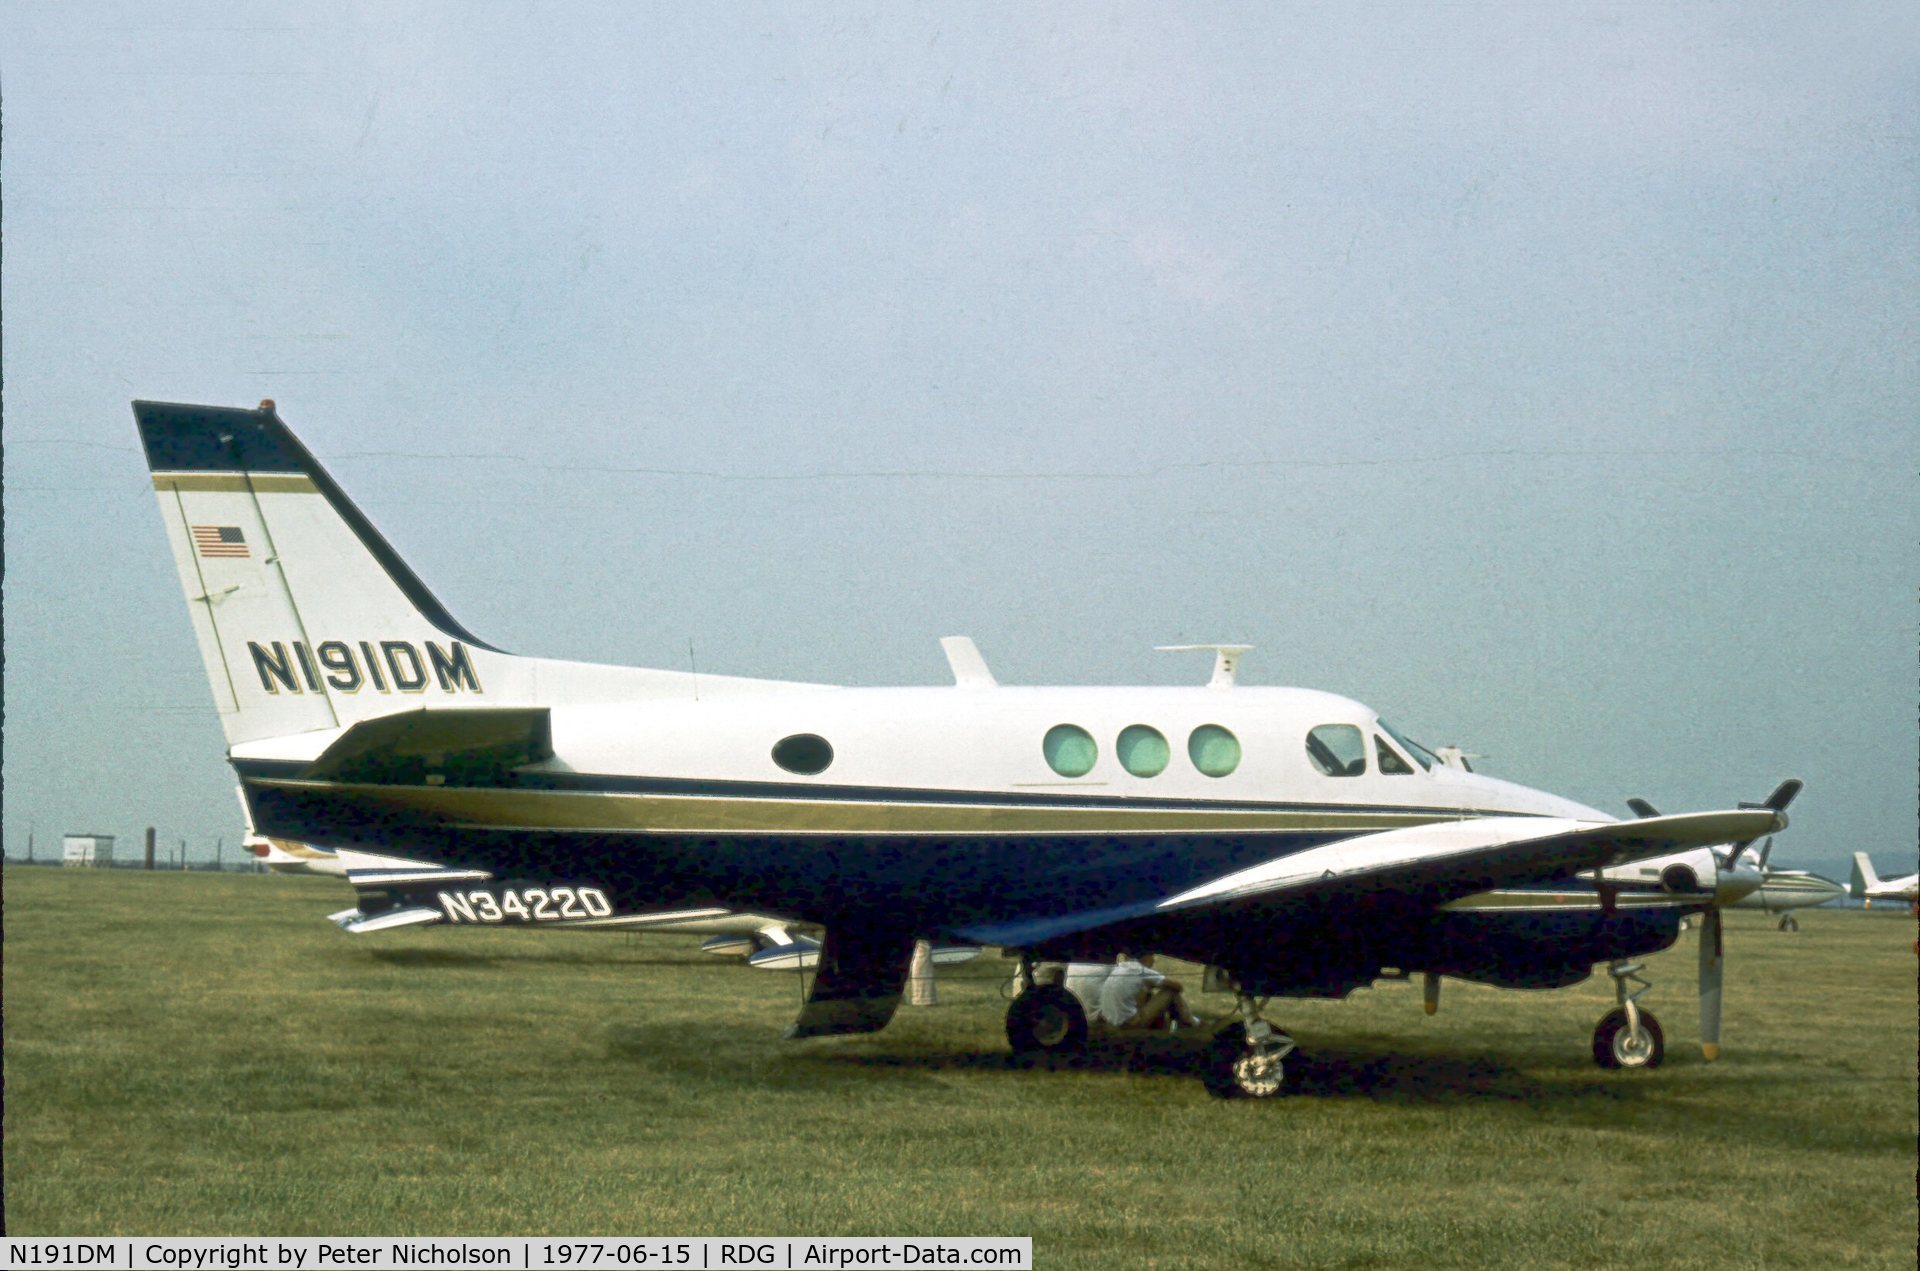 N191DM, Beech 65-90 C/N LJ100, This King Air attended the 1977 Reading Airshow.